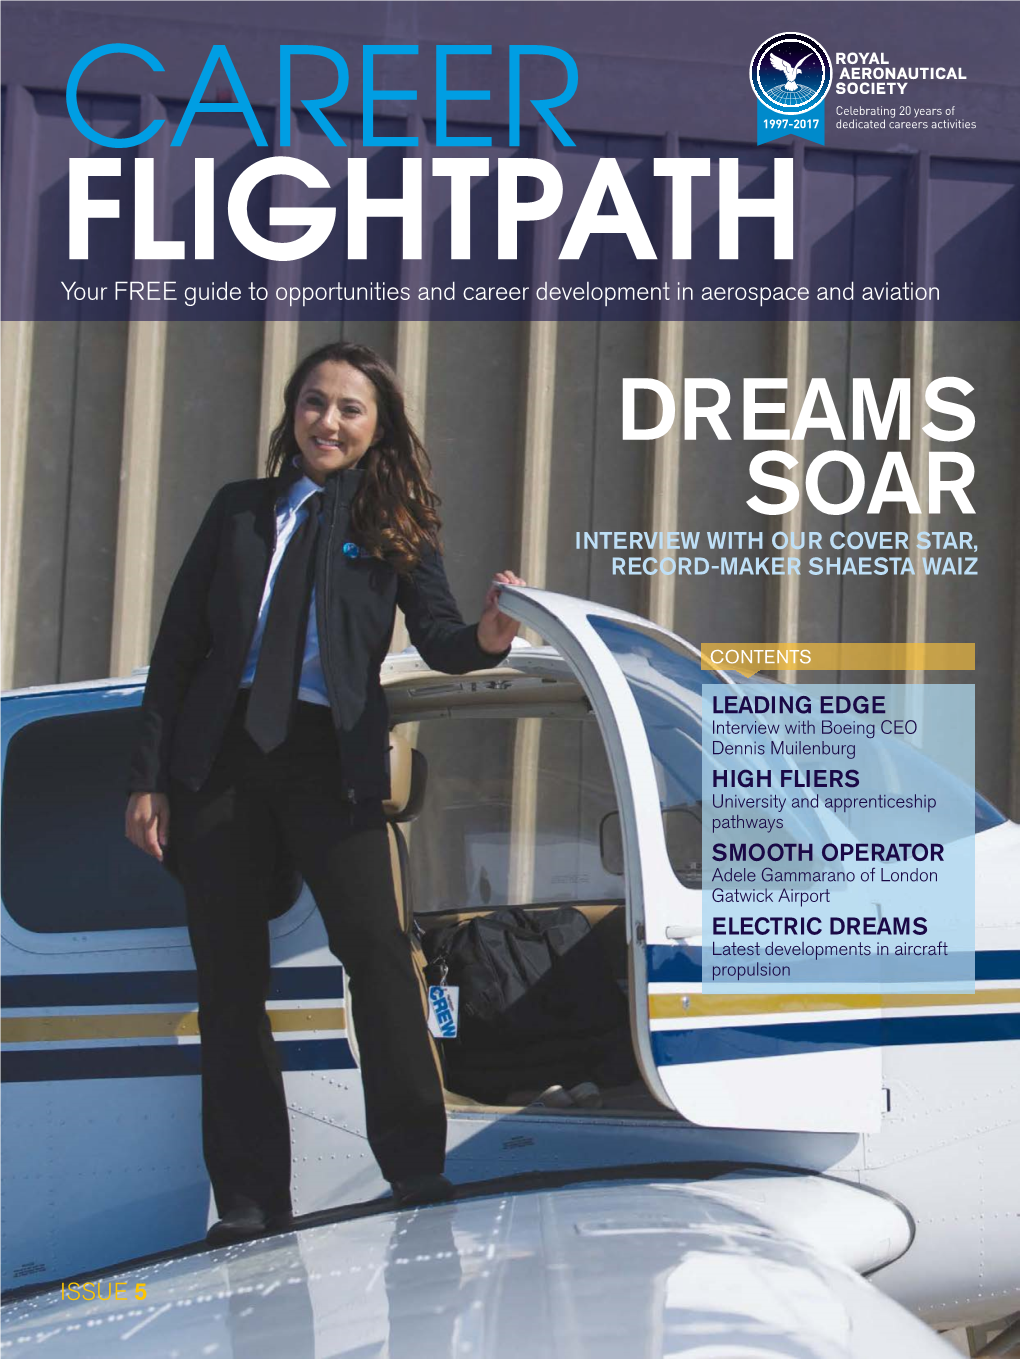 Dreams Soar Interview with Our Cover Star, Record-Maker Shaesta Waiz